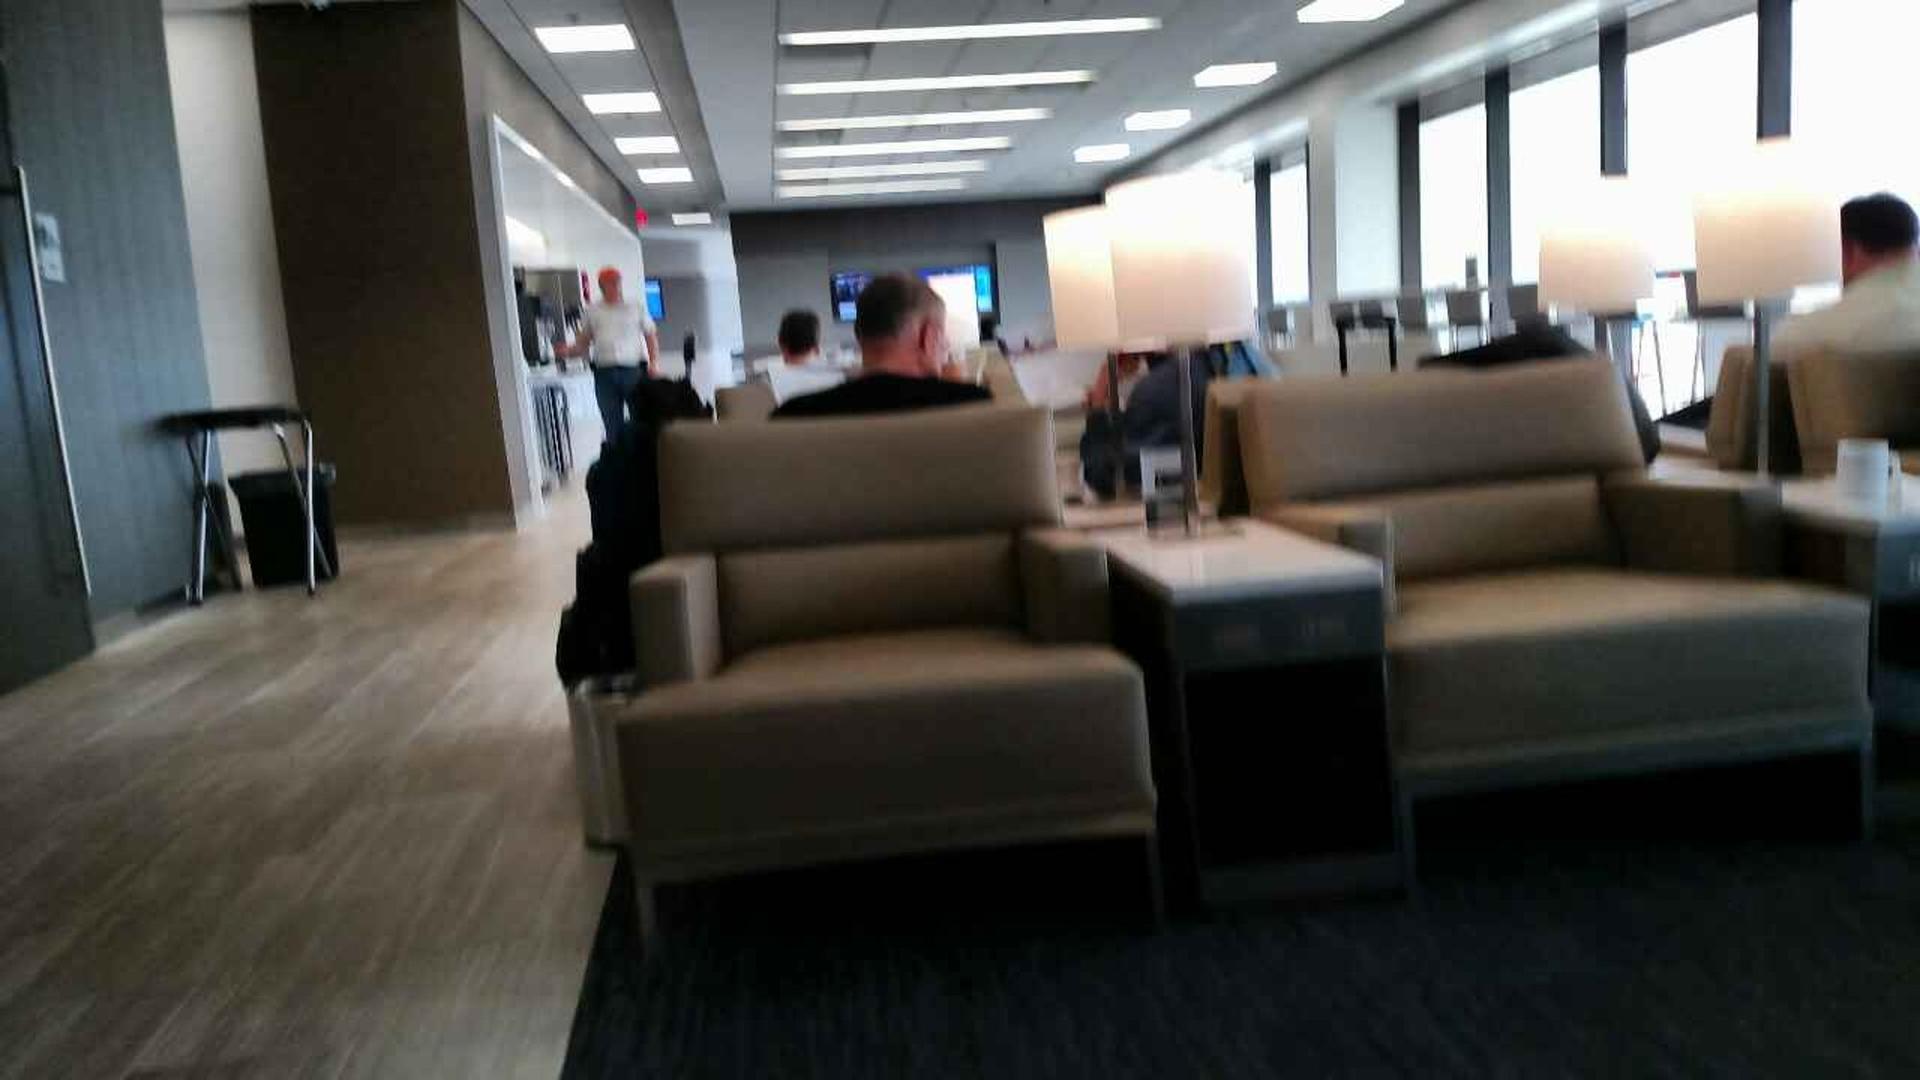 United Airlines United Club image 4 of 8